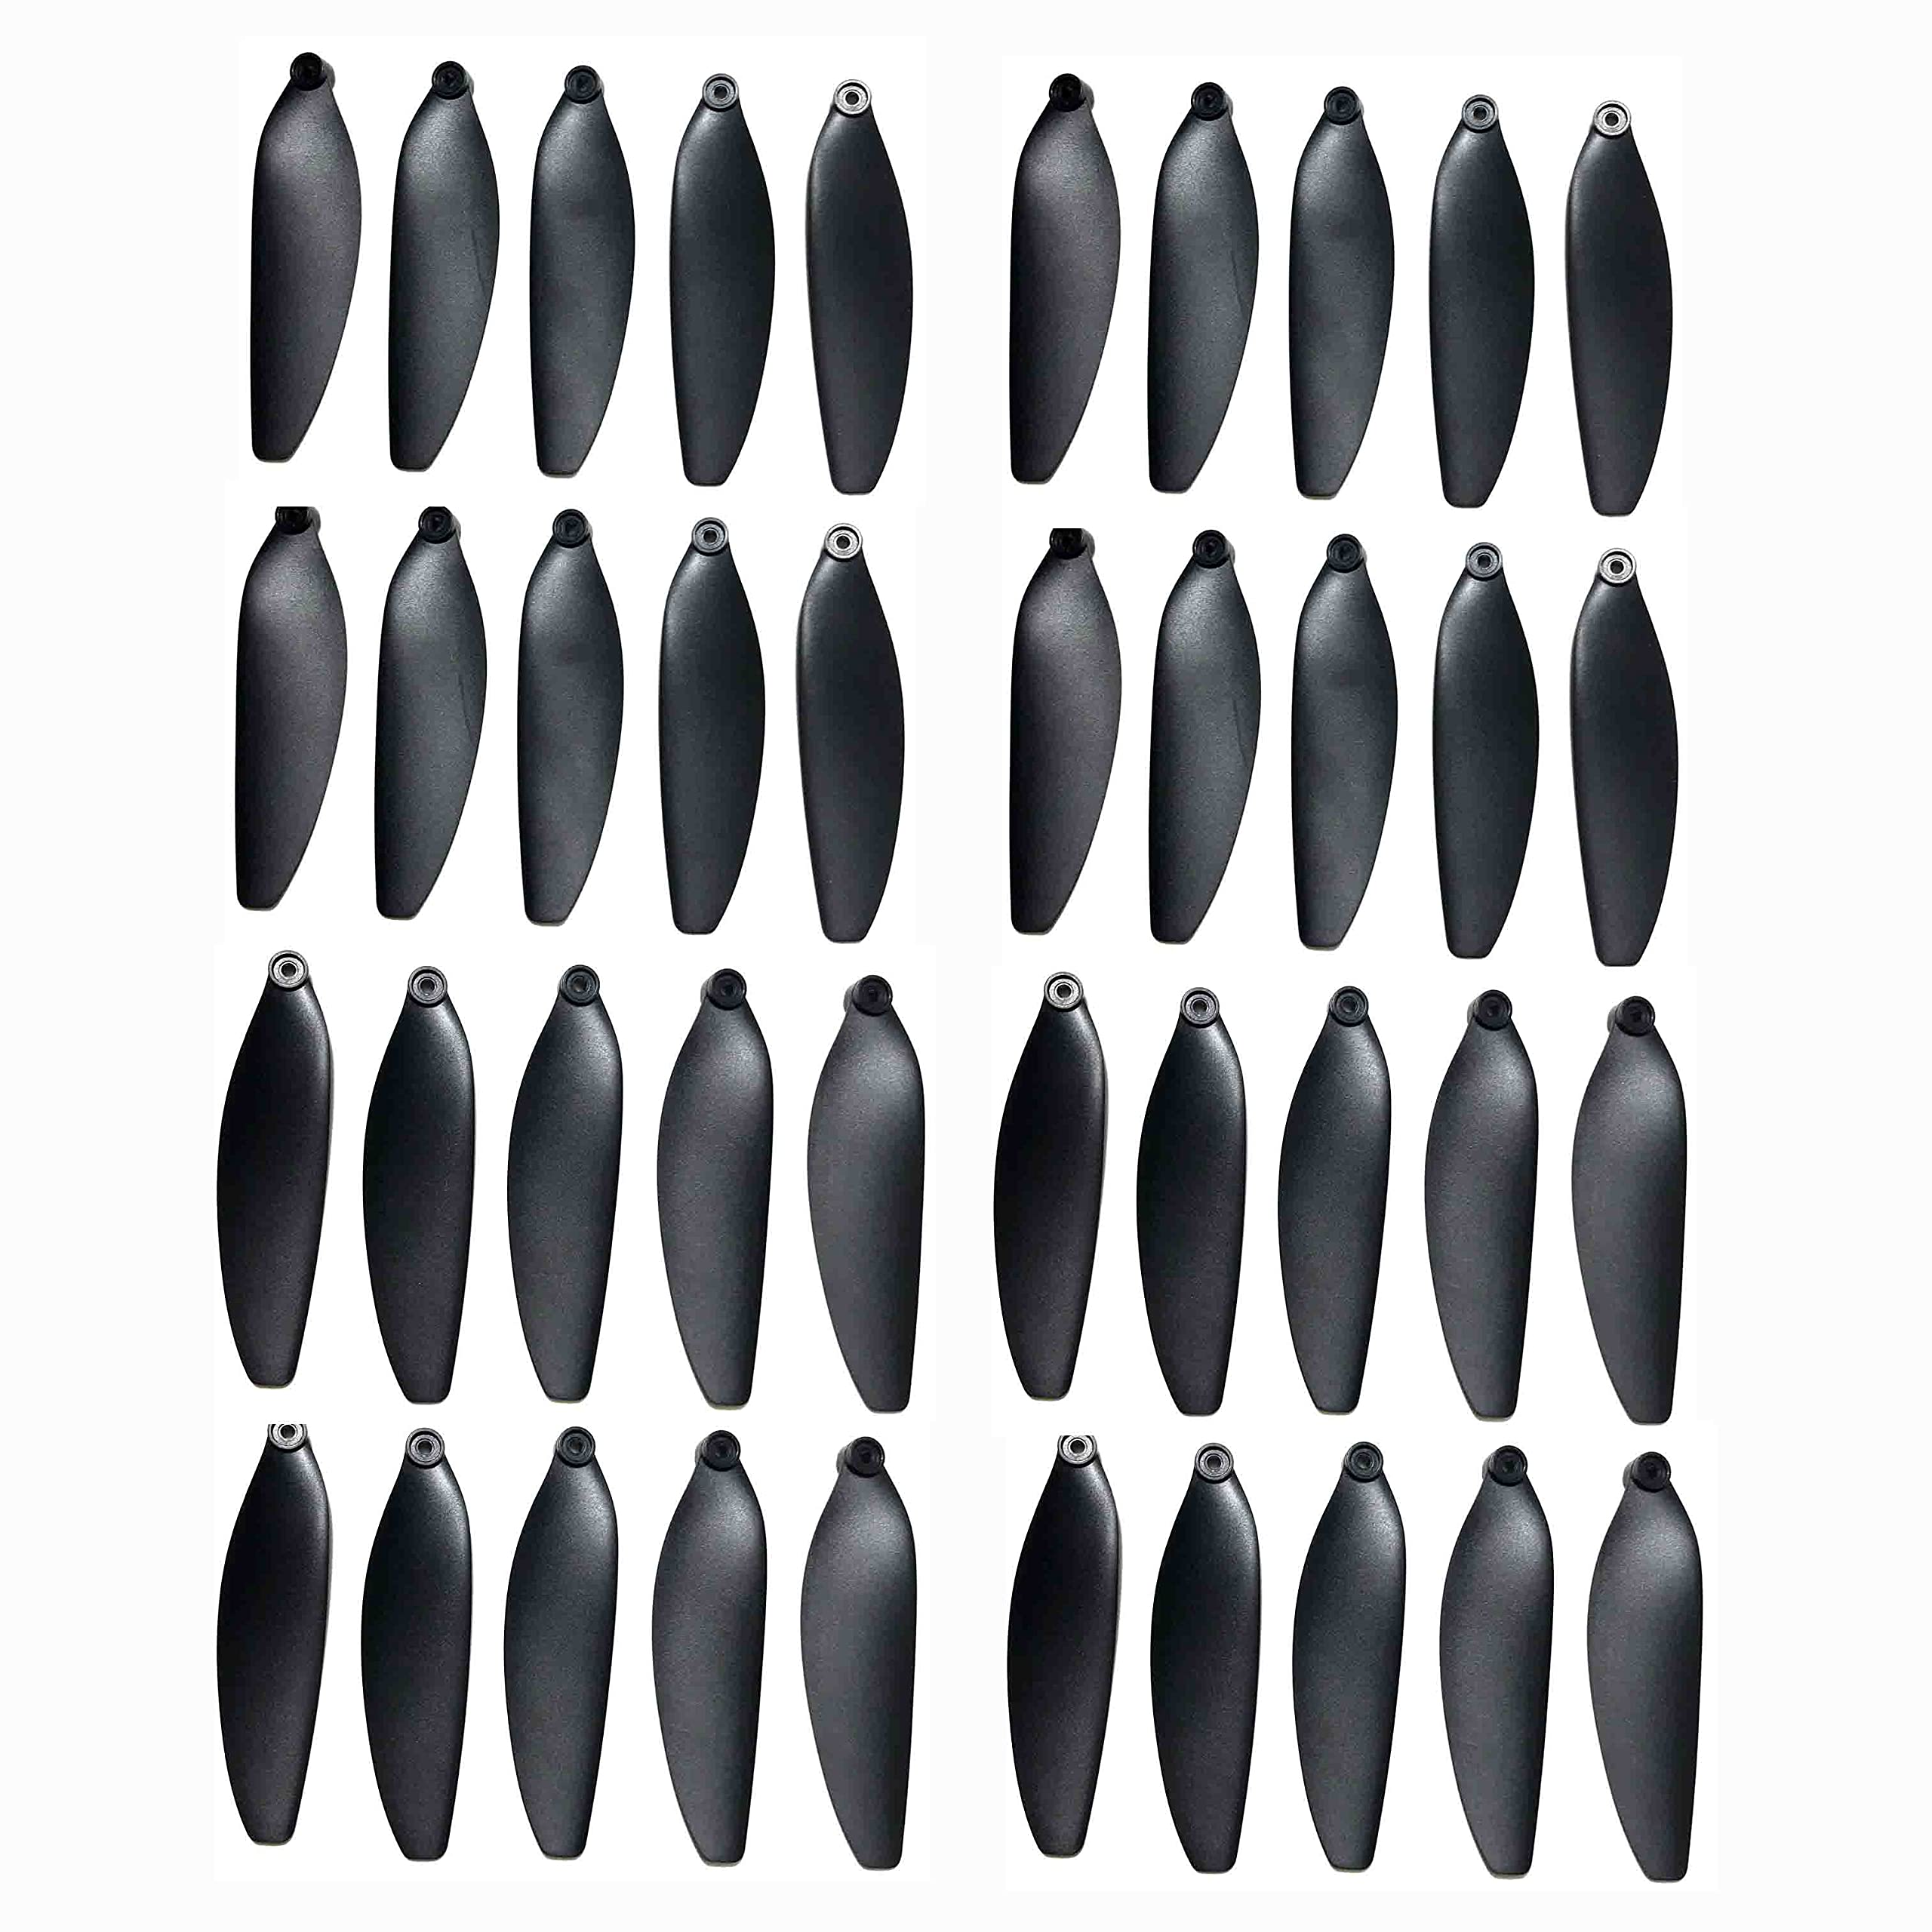 LILYY Zubehör für Drohnen 40pcs for SG907MAX RC Drone Propeller Blades Maple Leaf for SG907-MAX Quadcopter Accessories Brushless Motor Parts (Color : 40pcs)